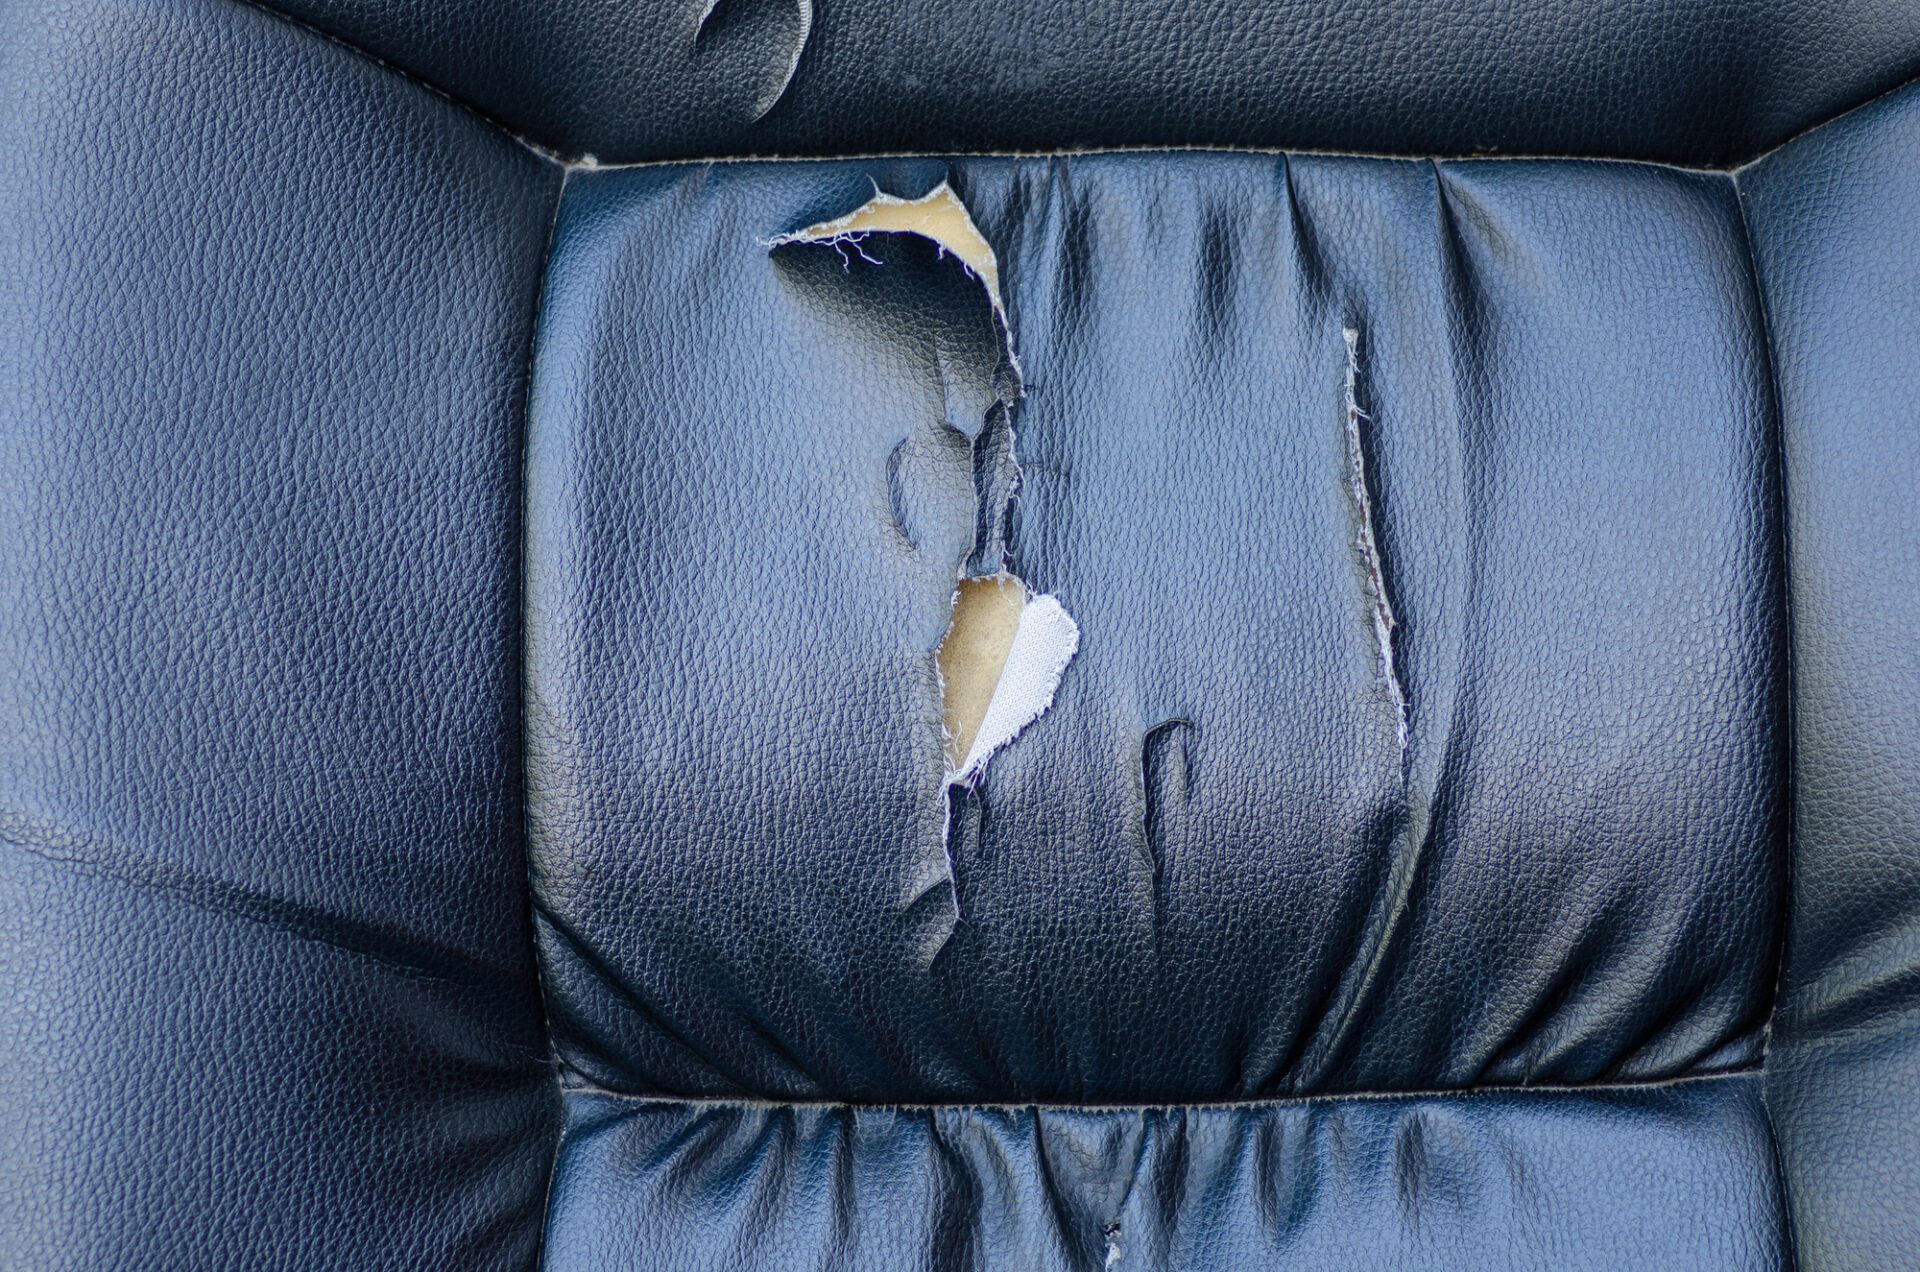 Budgeting for a move don't sacrifice so much that you have cheap movers damage your furniture. Here is a result of what can happen to your leather couch.